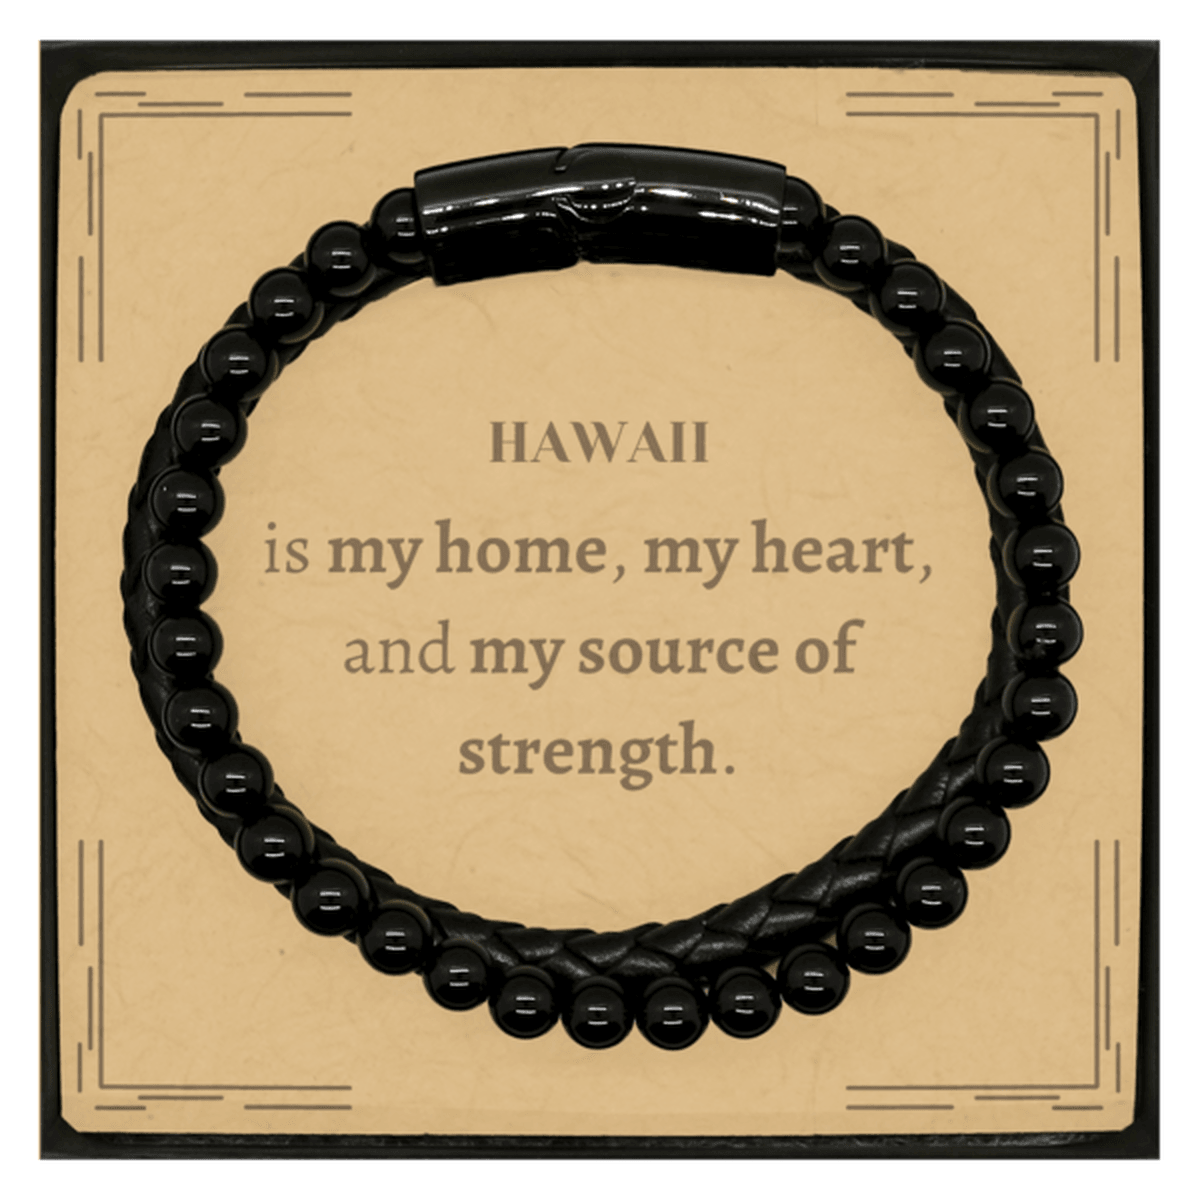 Hawaii is my home Gifts, Lovely Hawaii Birthday Christmas Stone Leather Bracelets For People from Hawaii, Men, Women, Friends - Mallard Moon Gift Shop